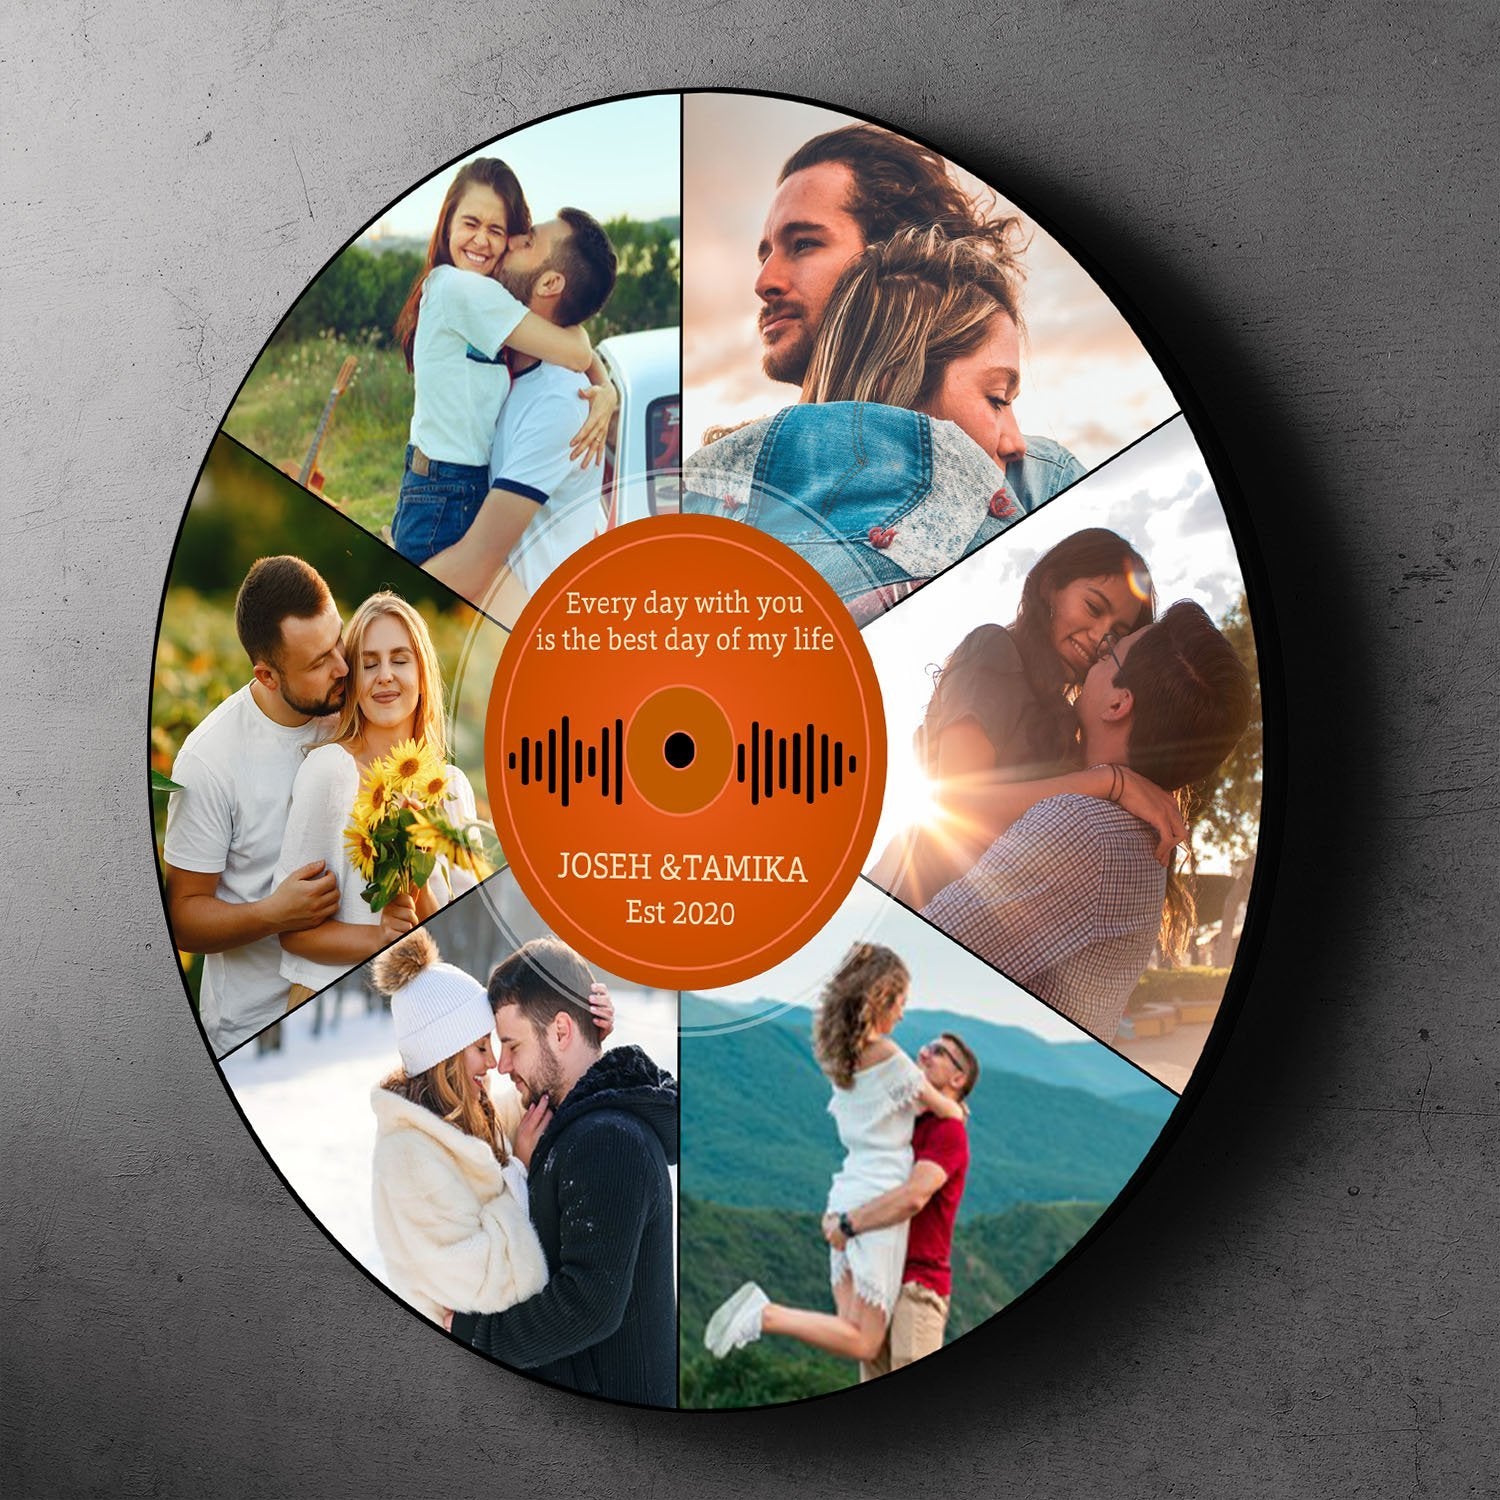 Custom Round Sign, Personalized Photo And Text, Vinyl Record, Gift For Anniversary